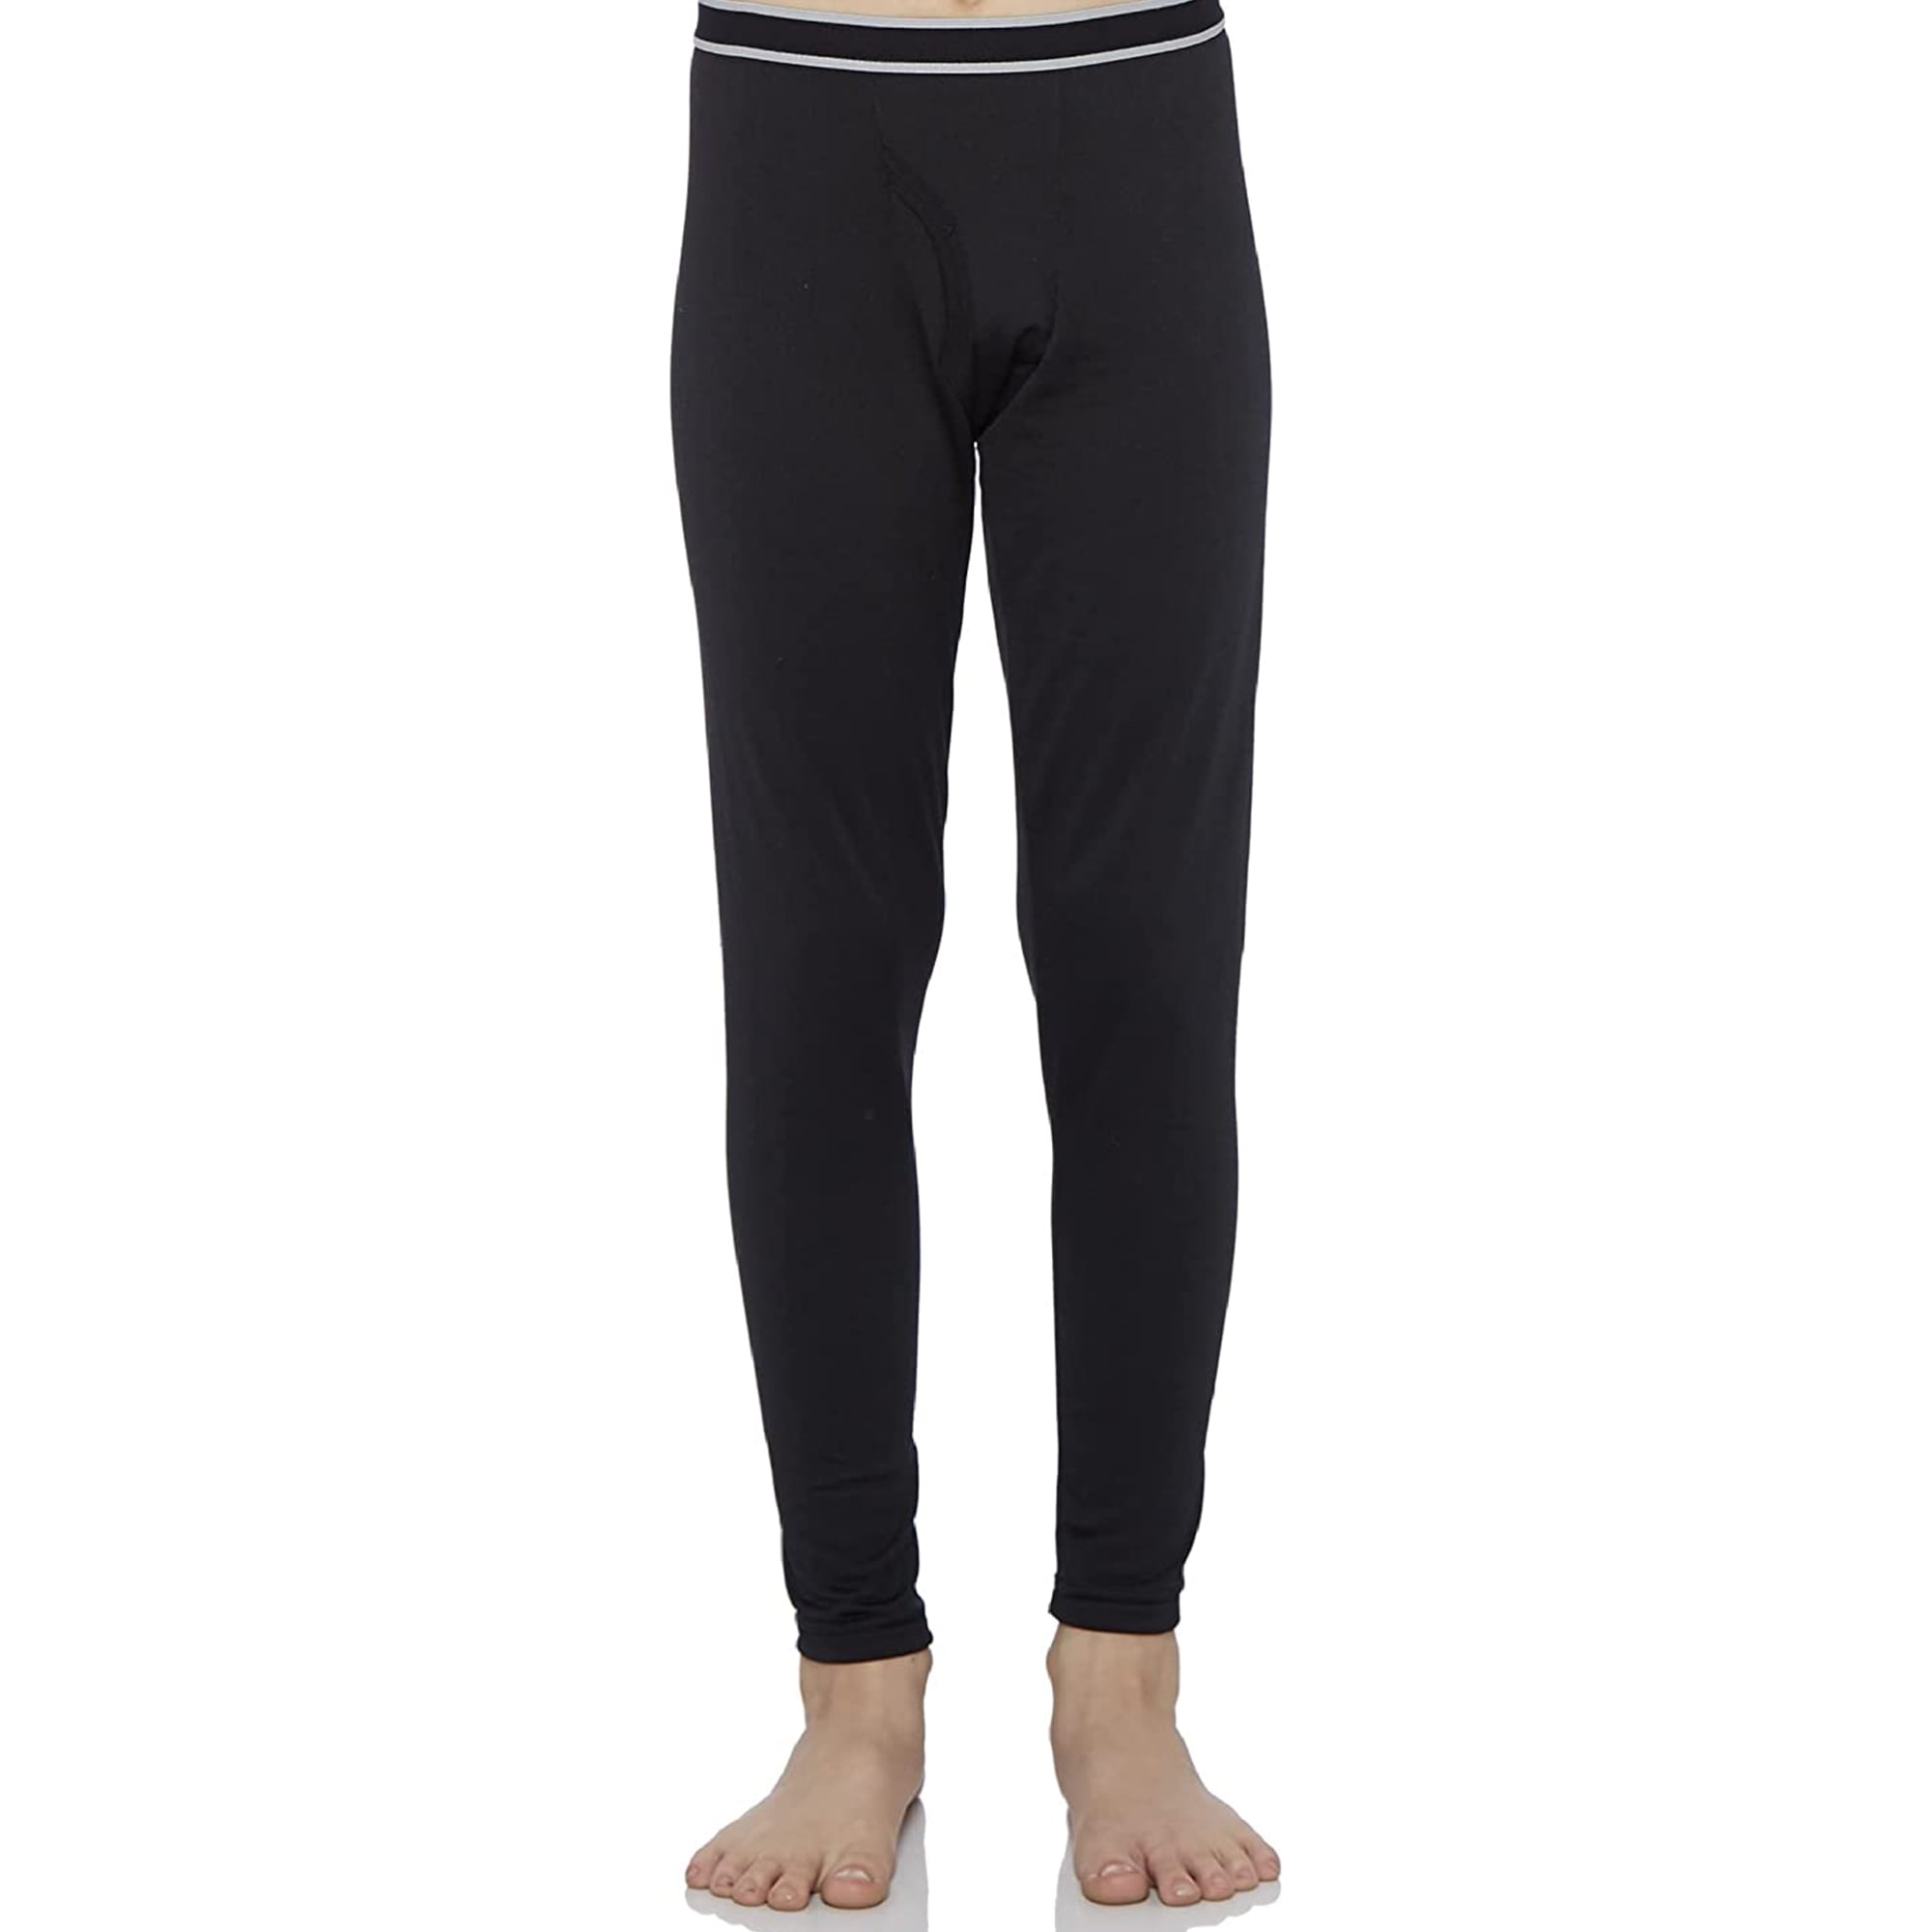 Rocky Fleece-Lined Bottoms Kids Base Layer Thermal Pants for Girls, Black  XS 